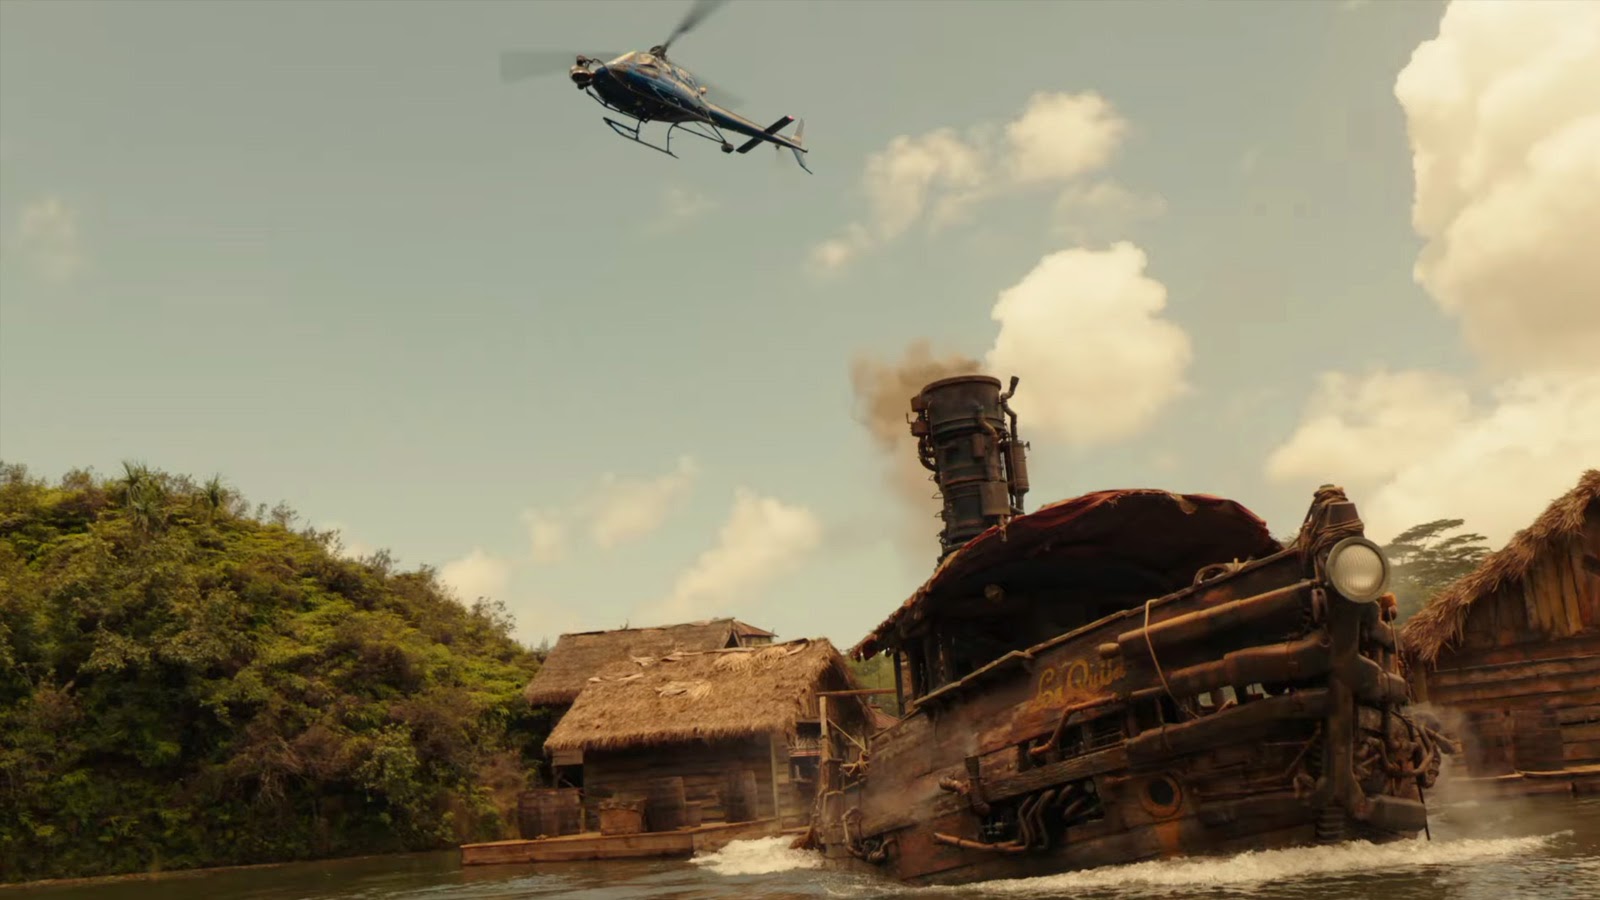 Jungle Cruise’s helicopter chase cam.